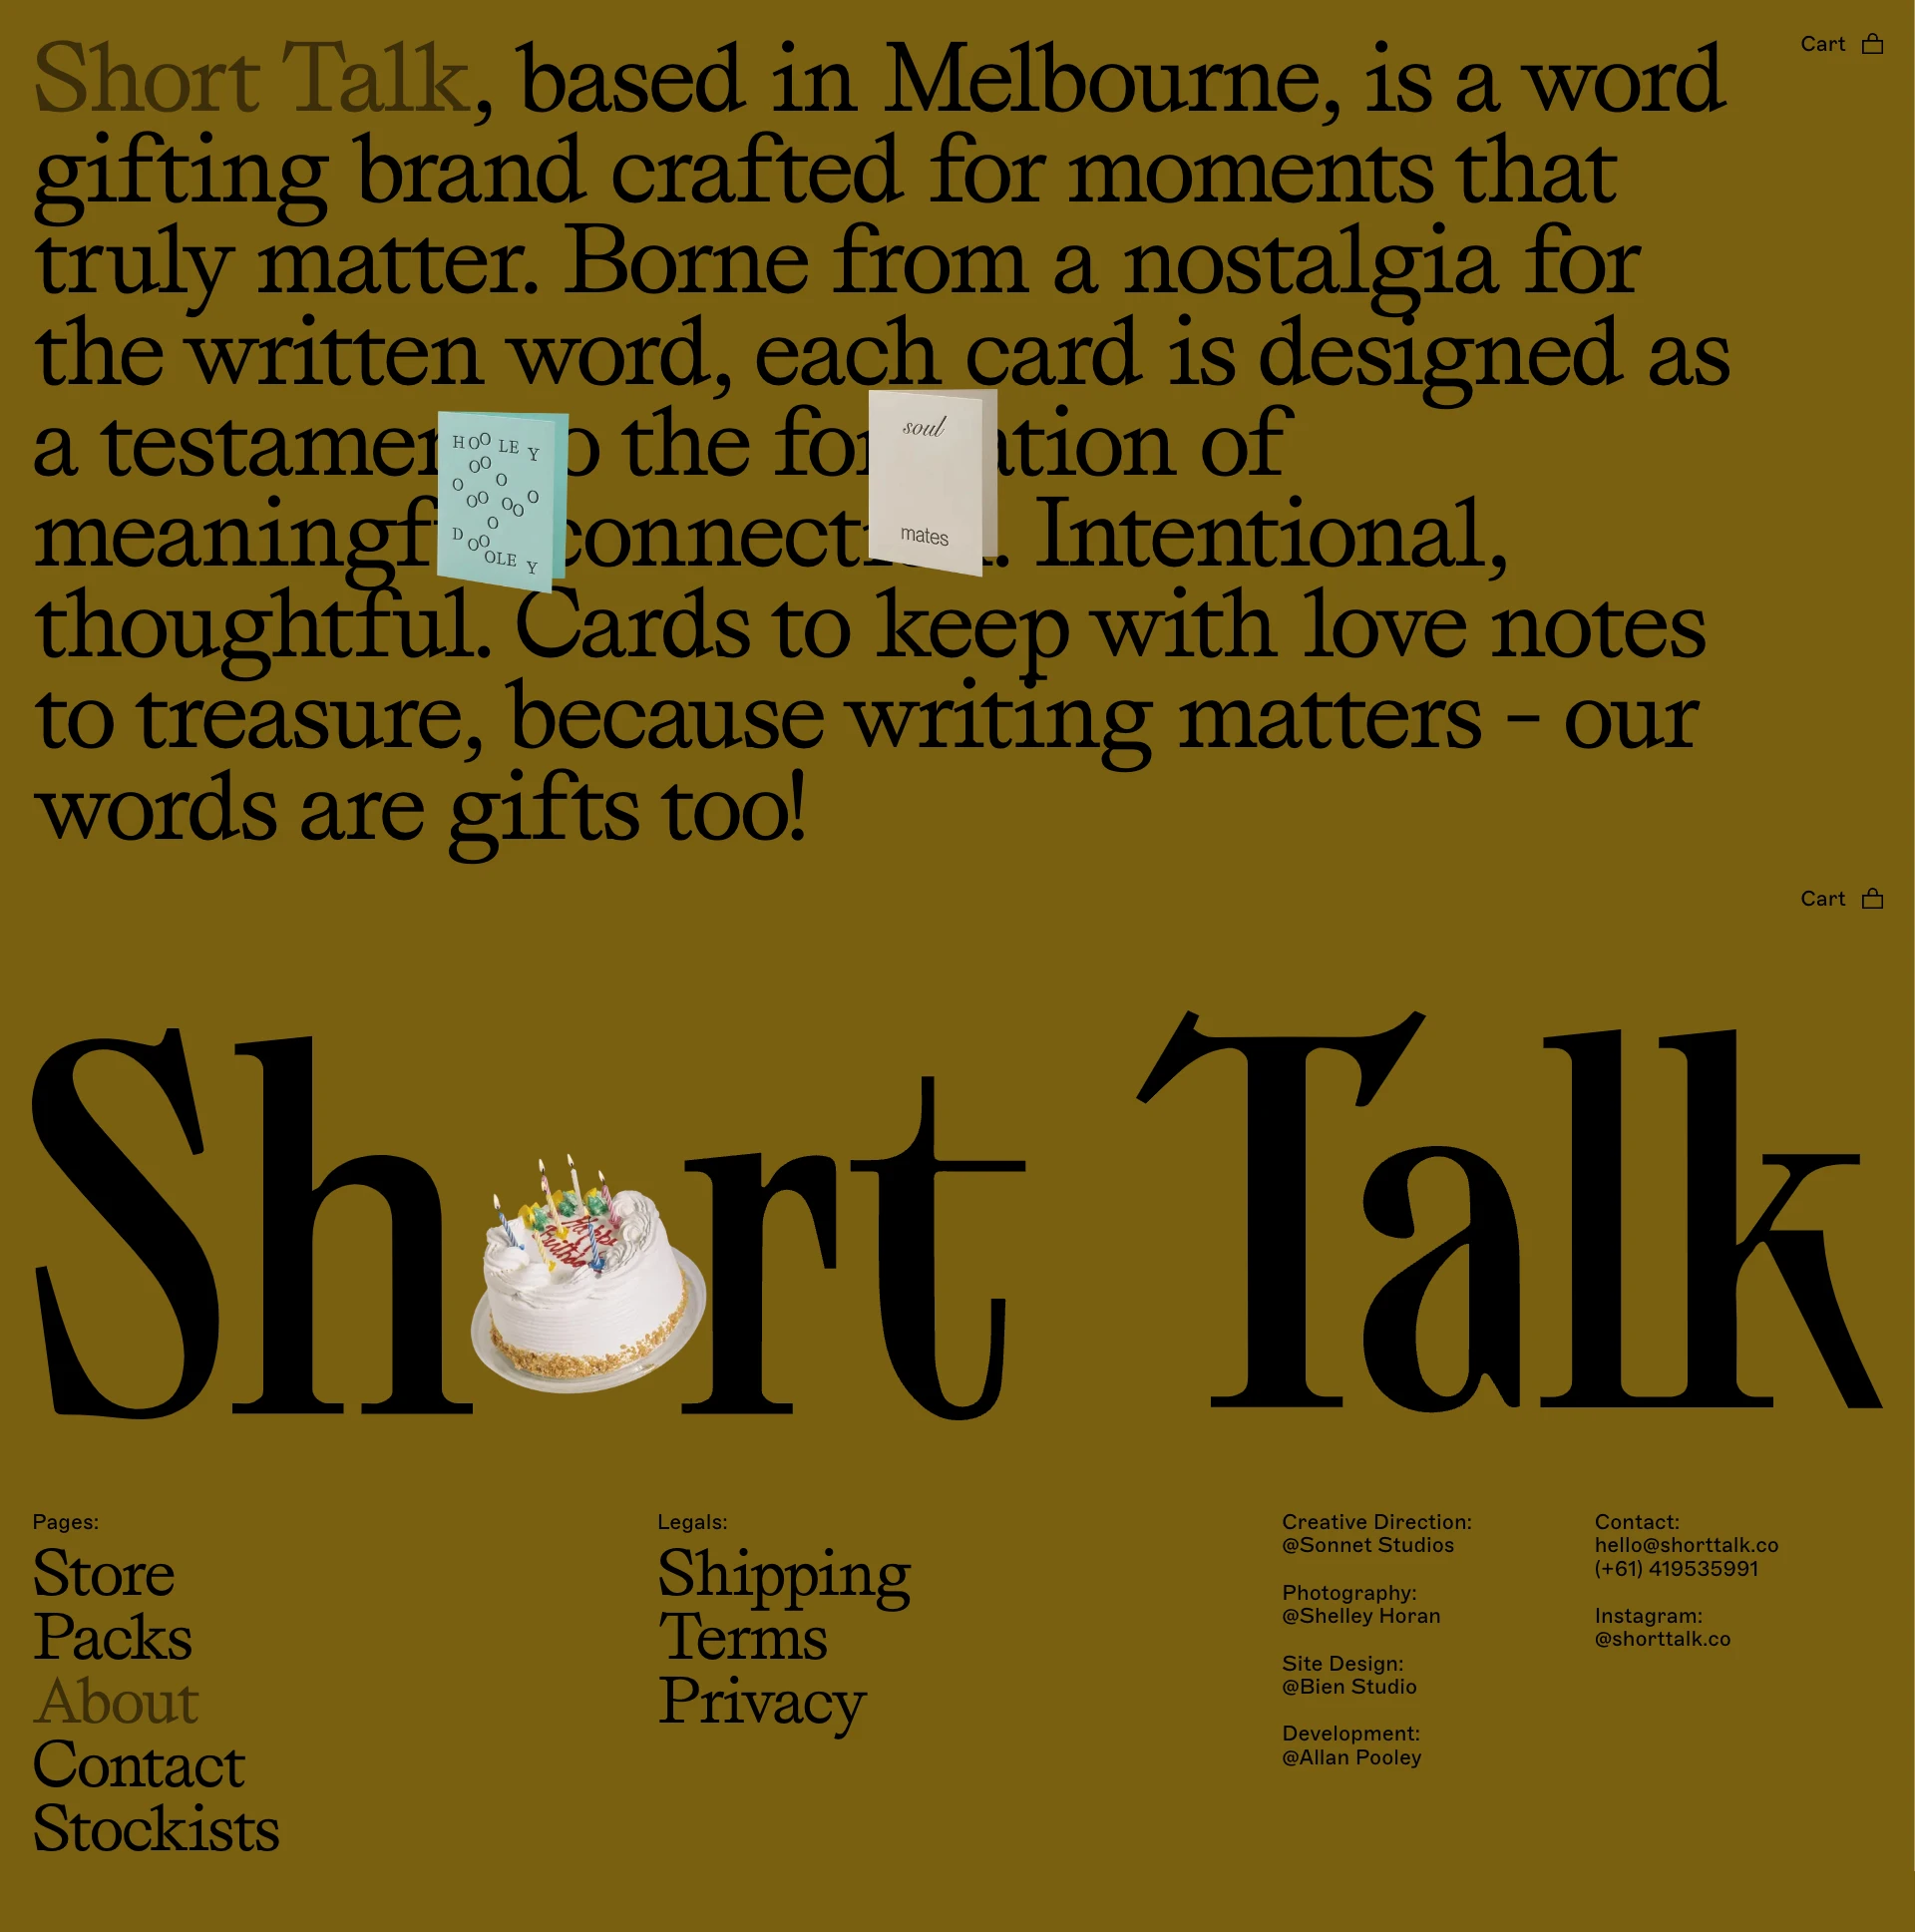 Short Talk Landing Page Example: Short Talk, based in Melbourne, is a word gifting brand crafted for moments that truly matter. Borne from a nostalgia for the written word, each card is designed as a testament to the formation of meaningful connection. Intentional, thoughtful. Cards to keep with love notes to treasure, because writing matters - our words are gifts too!